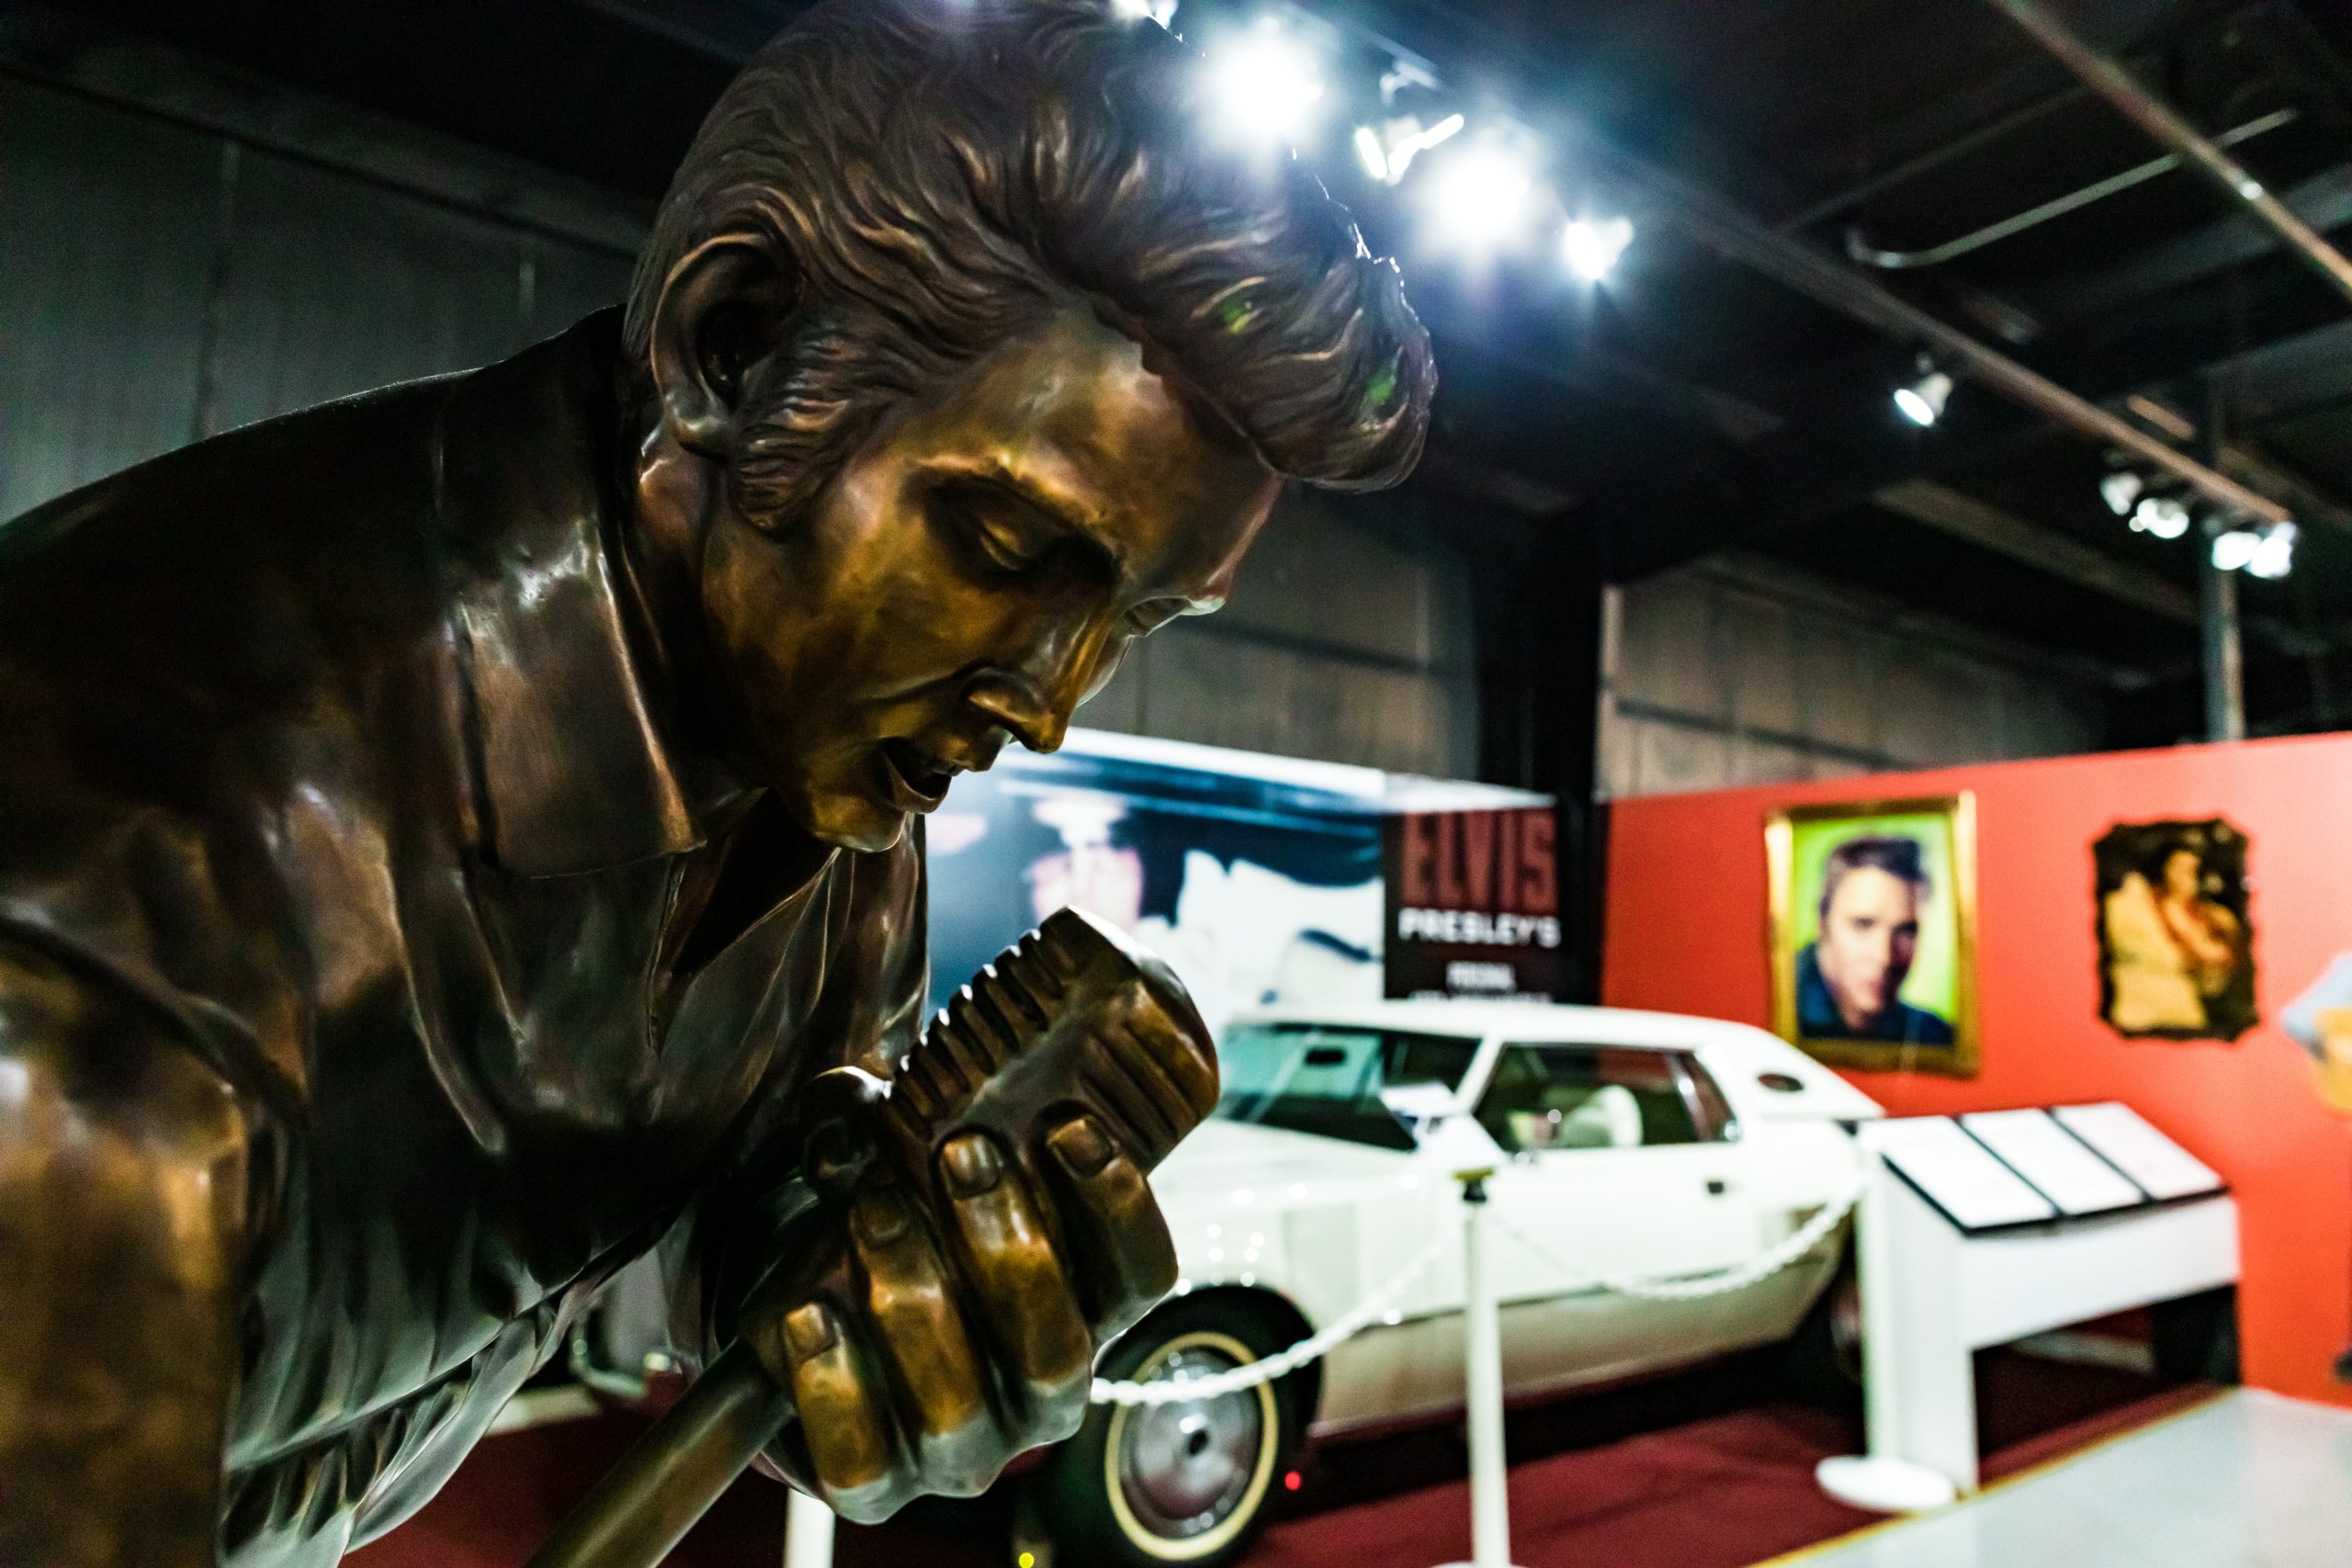 An Elvis Presley statue at the Historic Auto Attractions Museum stands in front of a white Cadillac exhibit.